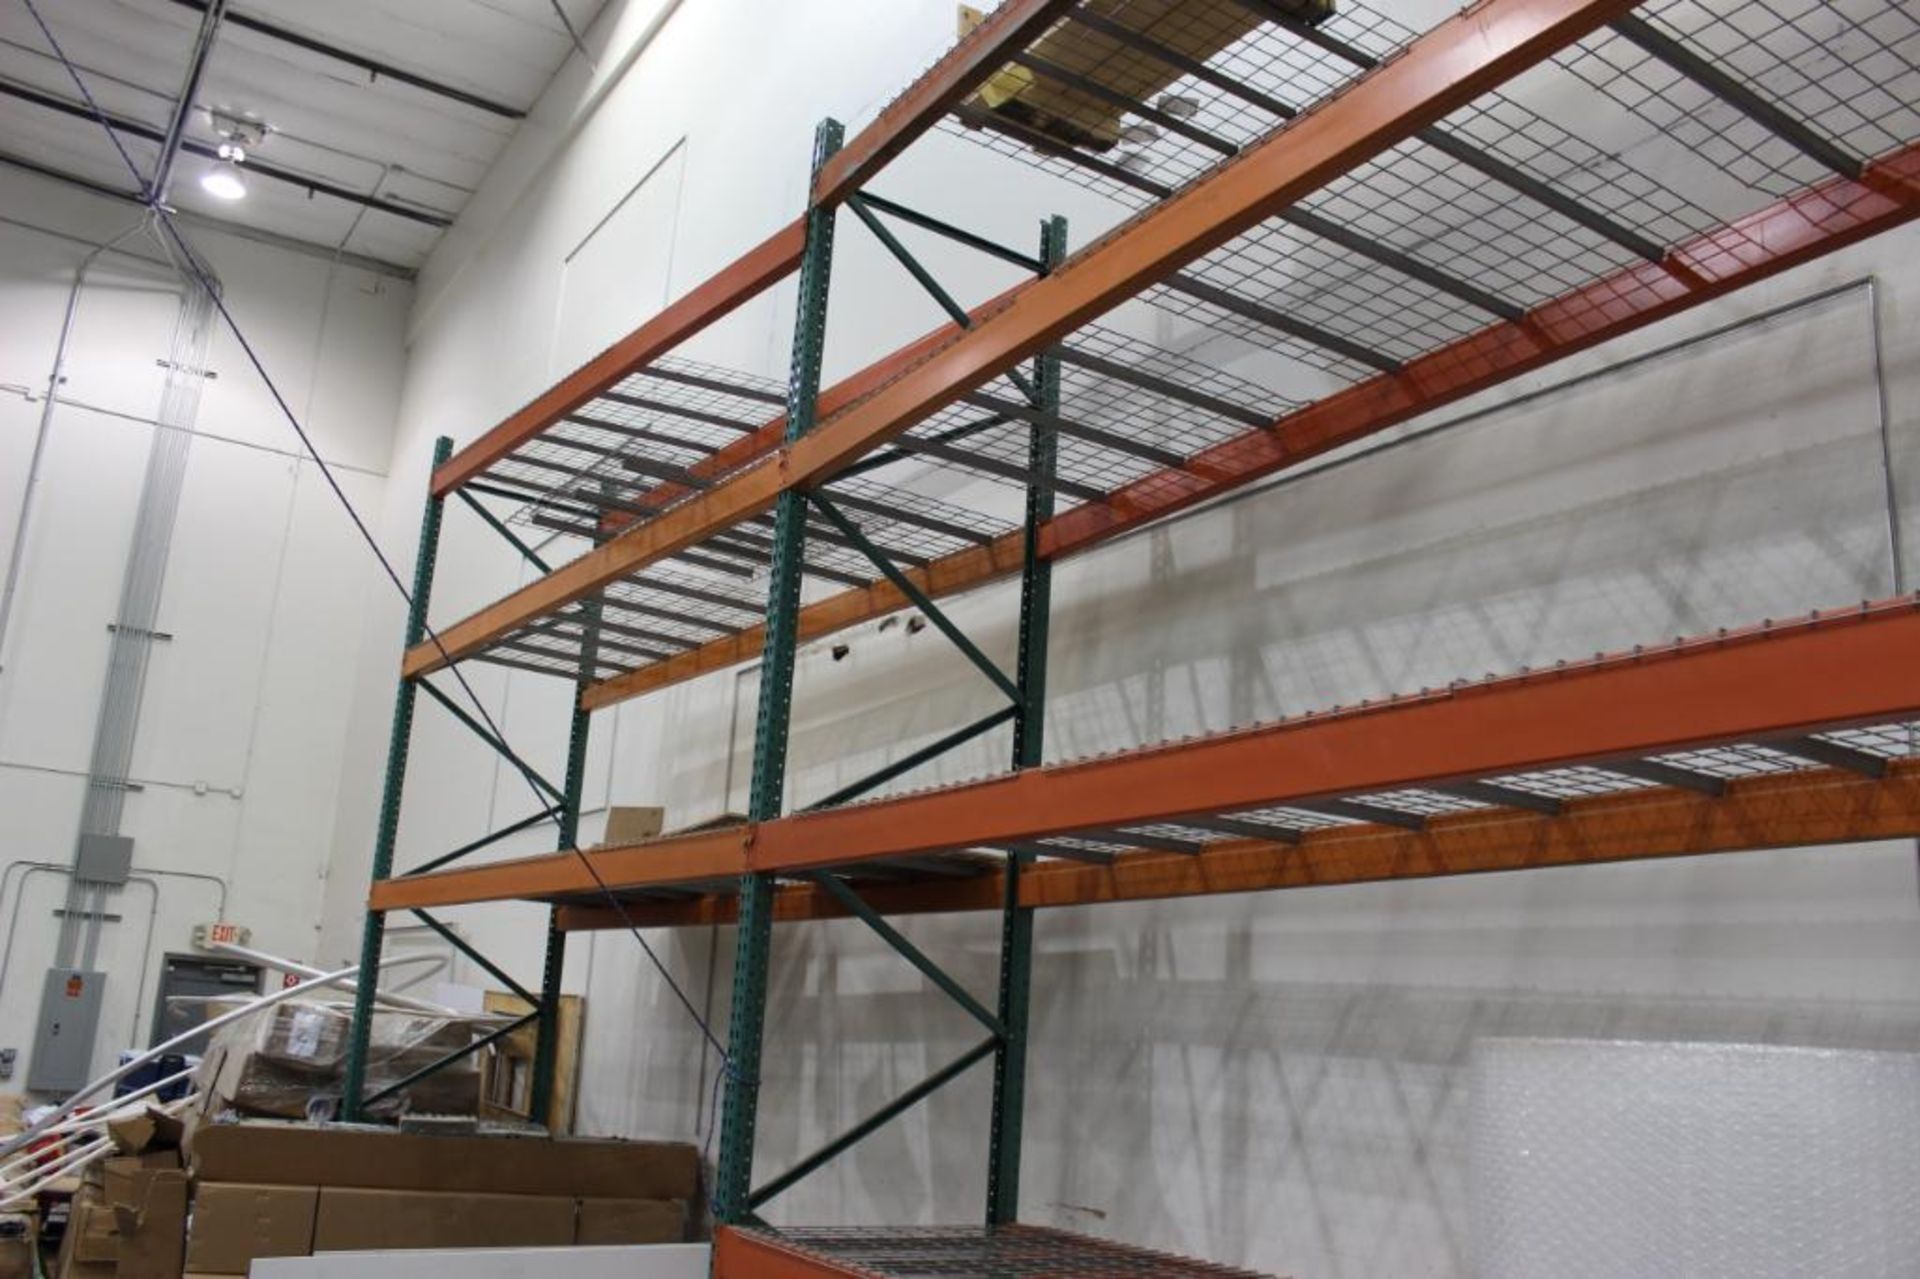 (3)-sections pallet racking 16' x 42” x 13' consisting of (24)-13' crossbars and (4)- 16'x42” uprigh - Image 4 of 4